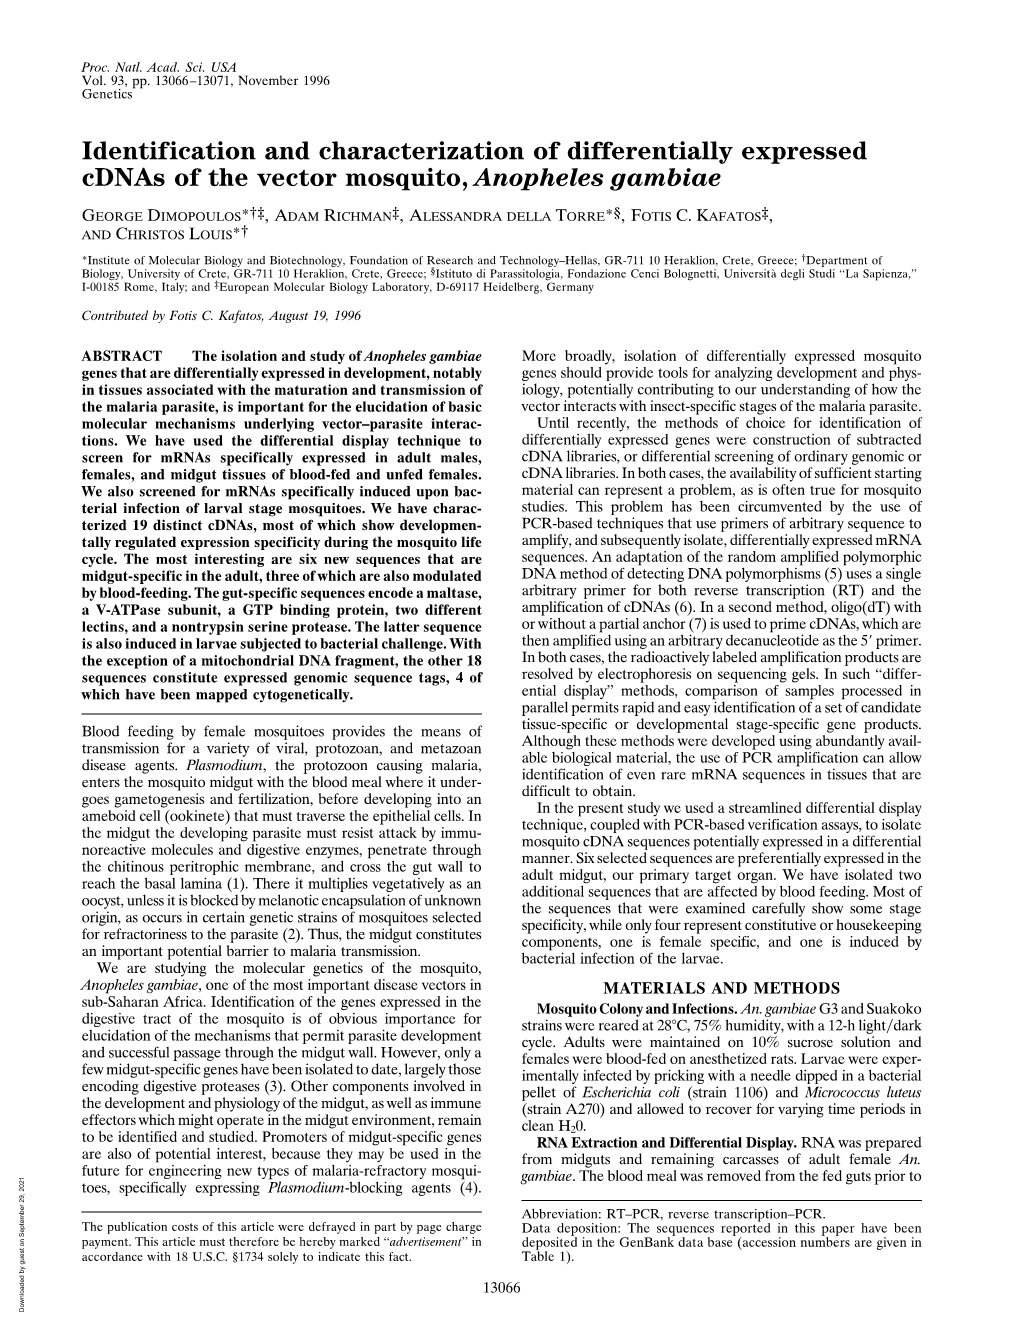 Identification and Characterization of Differentially Expressed Cdnas of the Vector Mosquito, Anopheles Gambiae